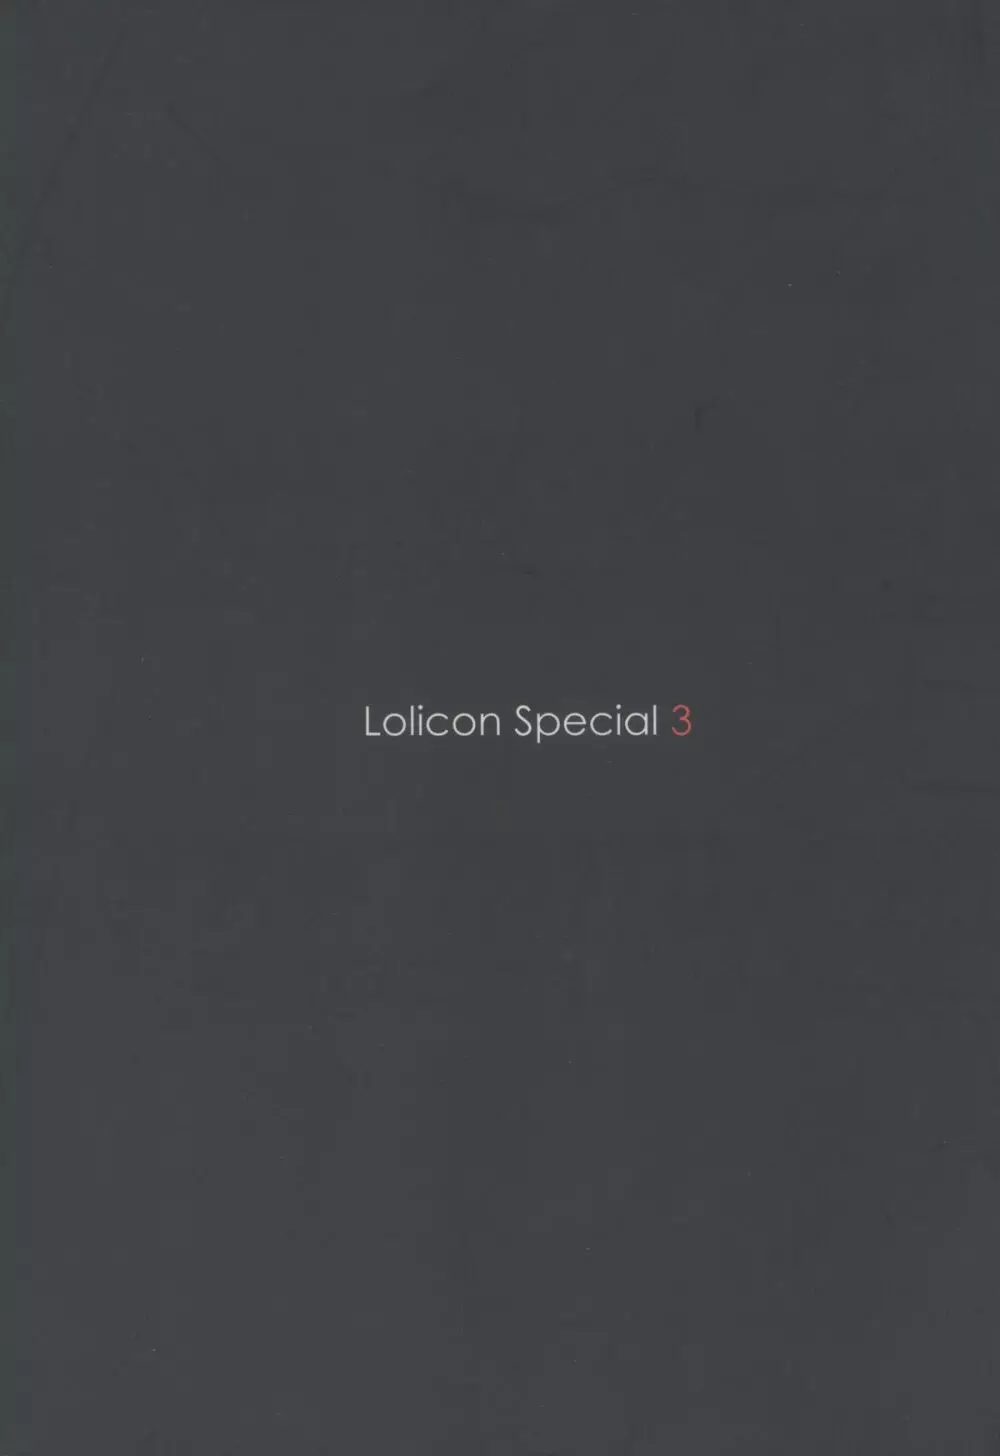 Lolicon Special 3 2ページ